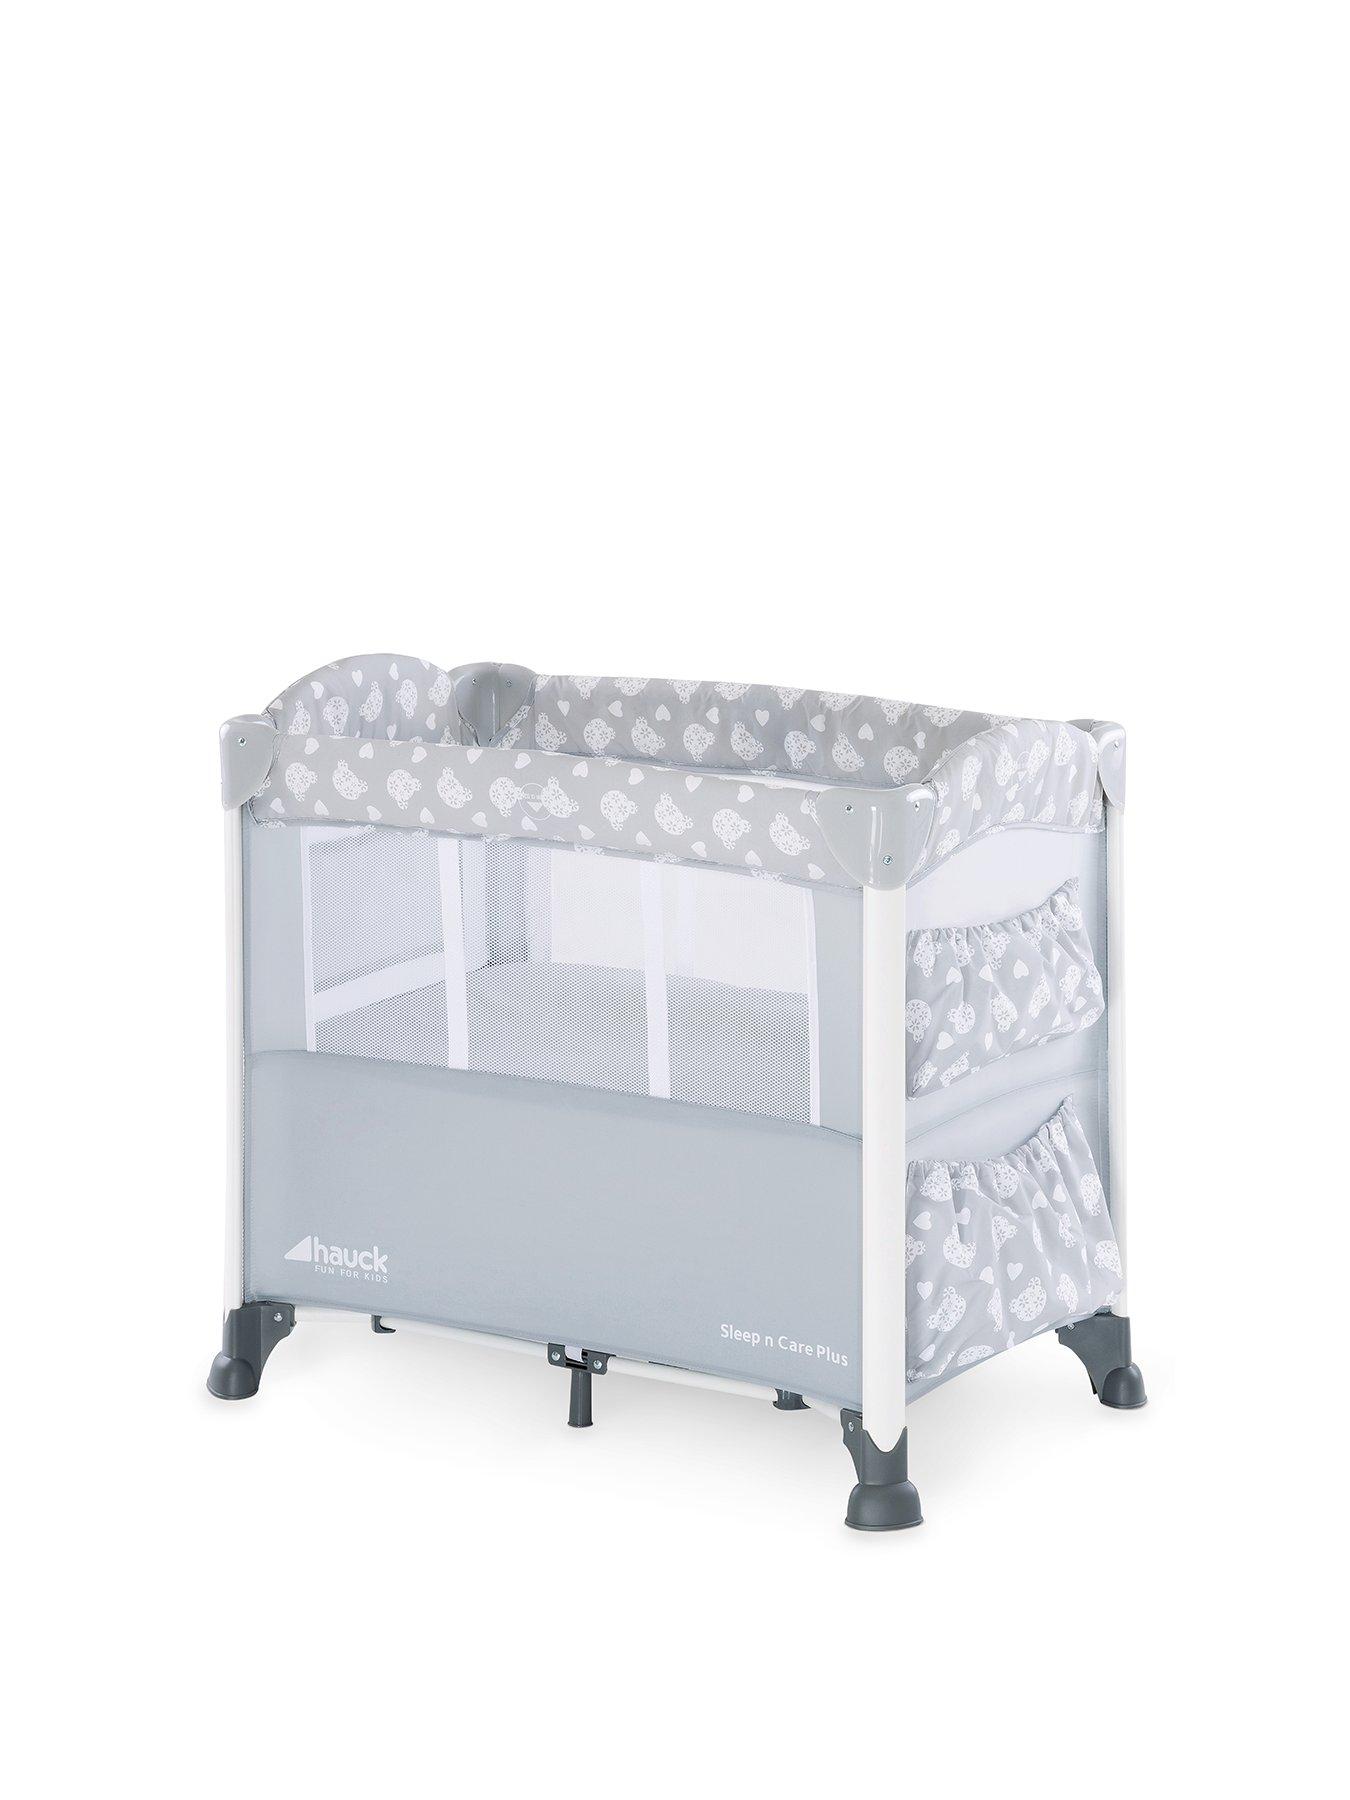 hauck travel cot size